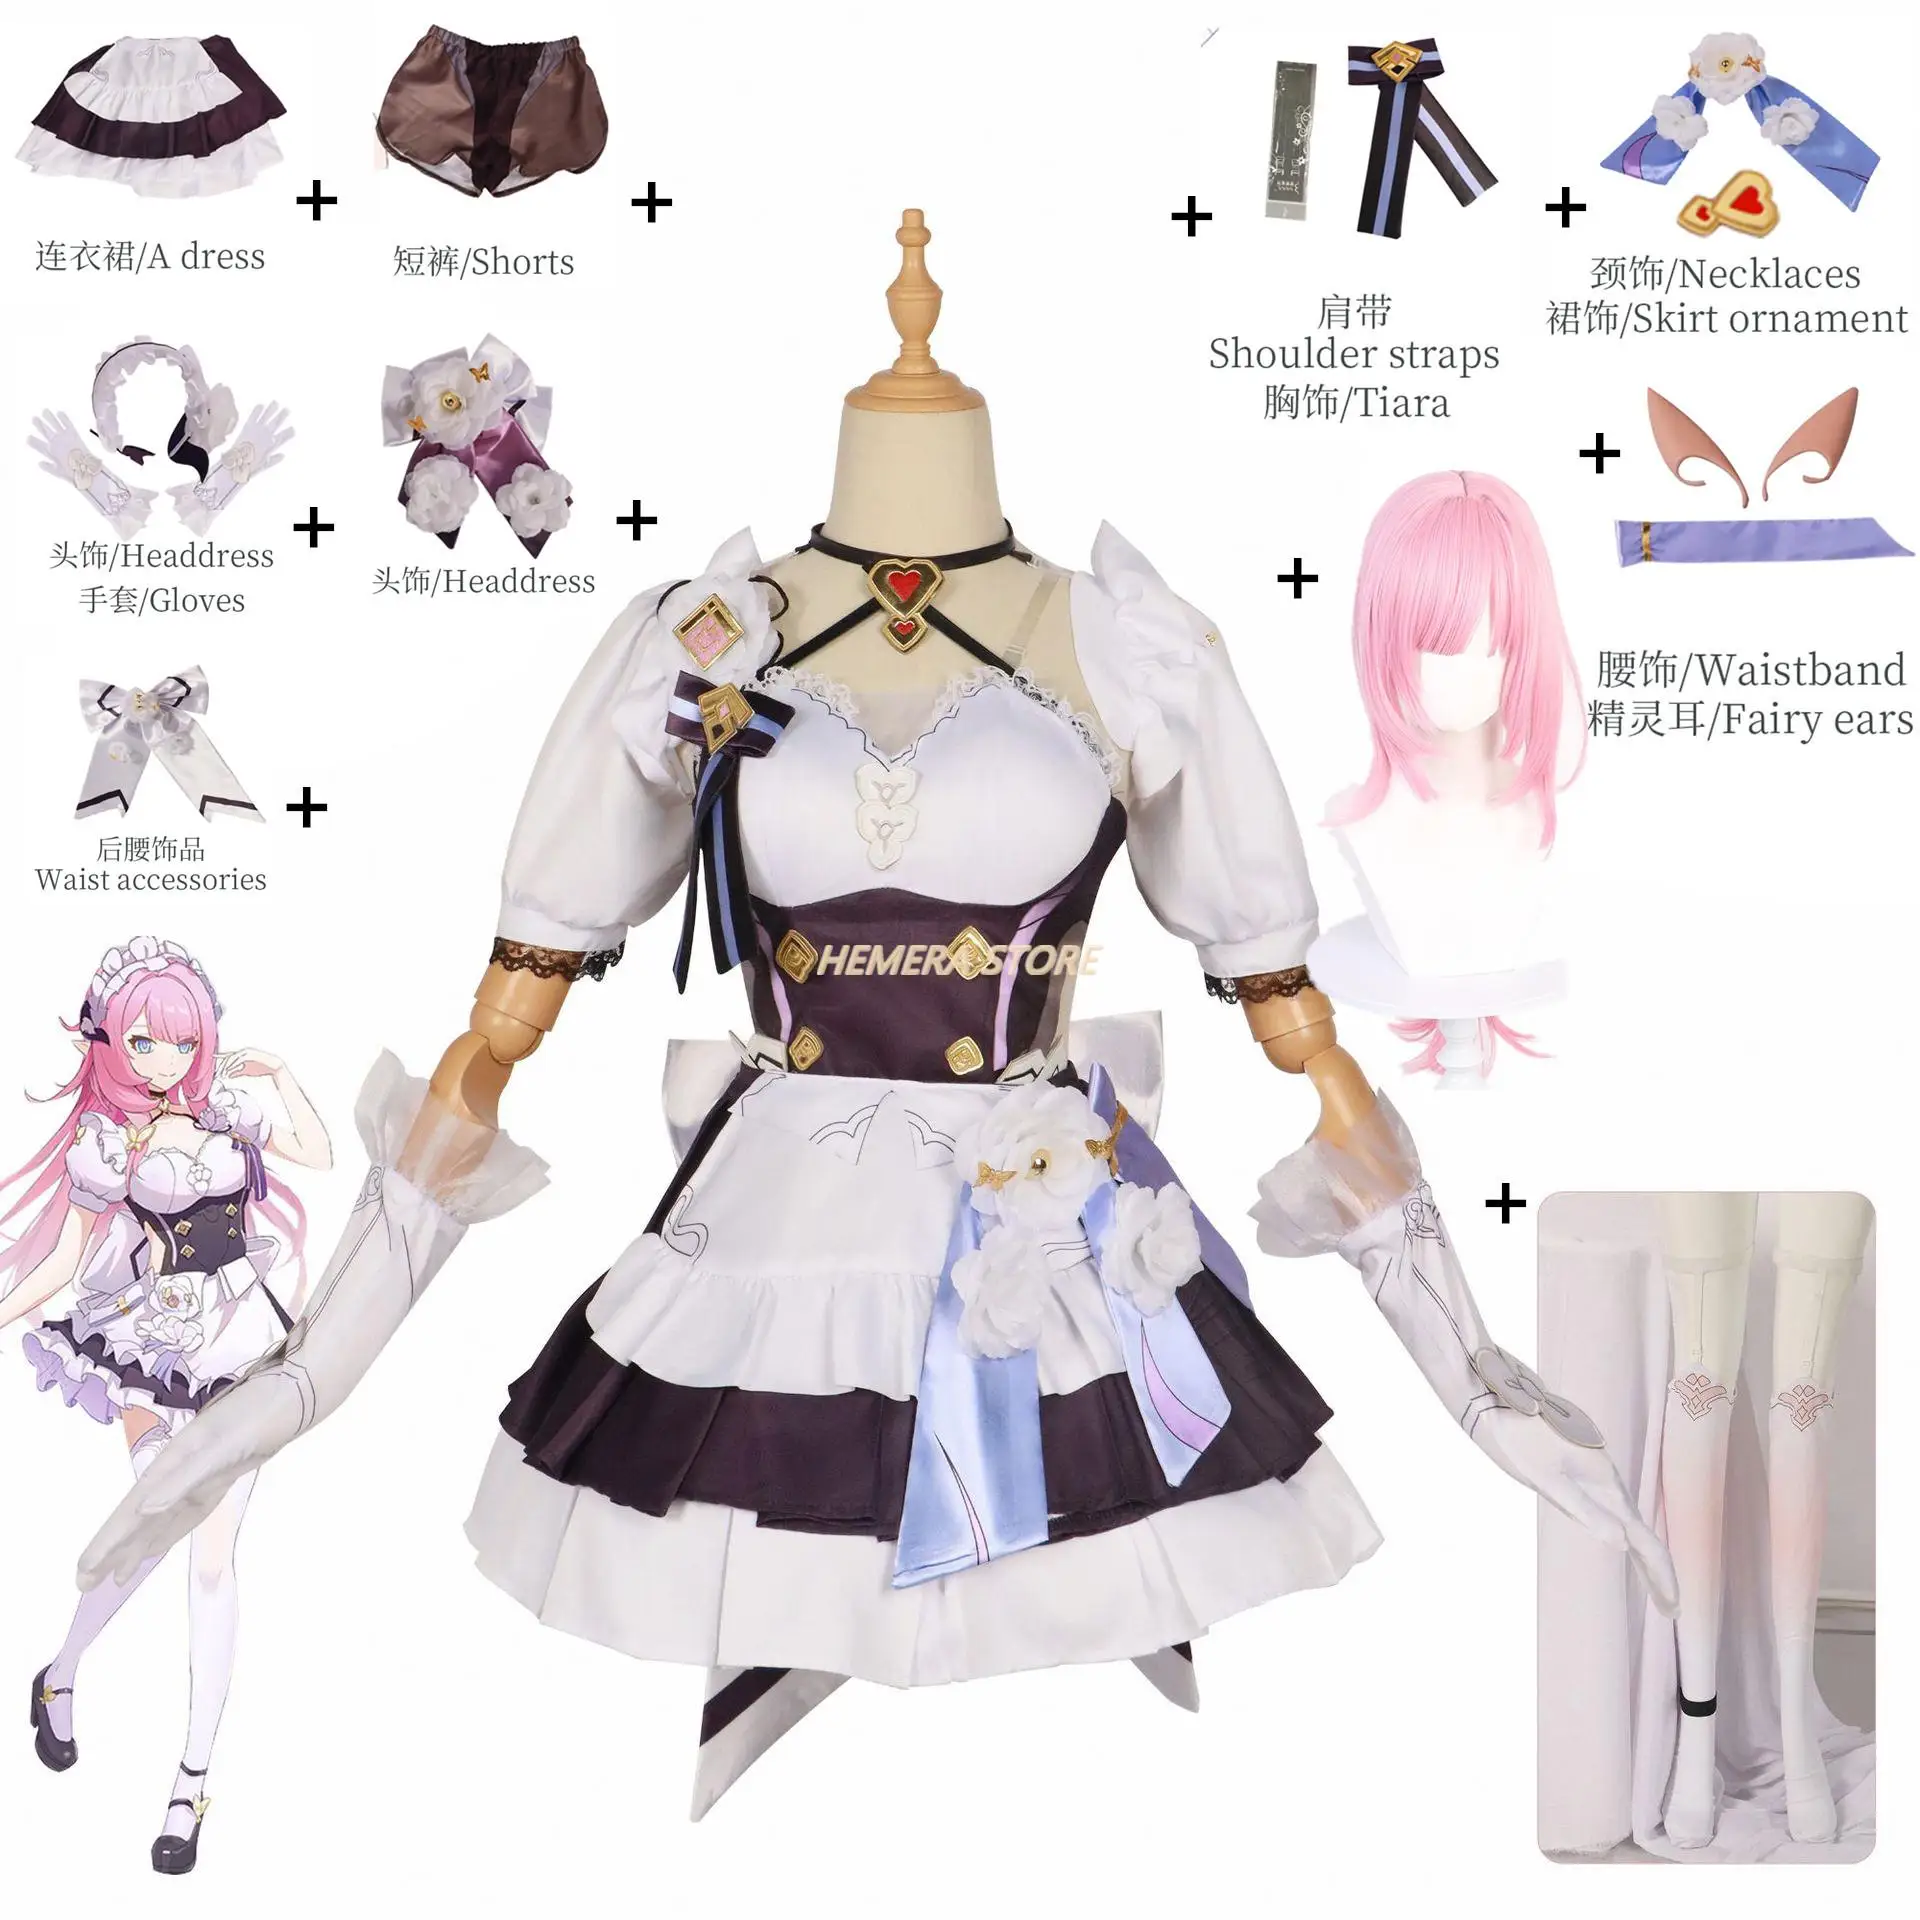 

Game Honkai Impact 3rd: Elysia Maid Costume Miss Pink Elf Halloween Carnival New Skin Dress Wig Role Playing Cosplay Costume